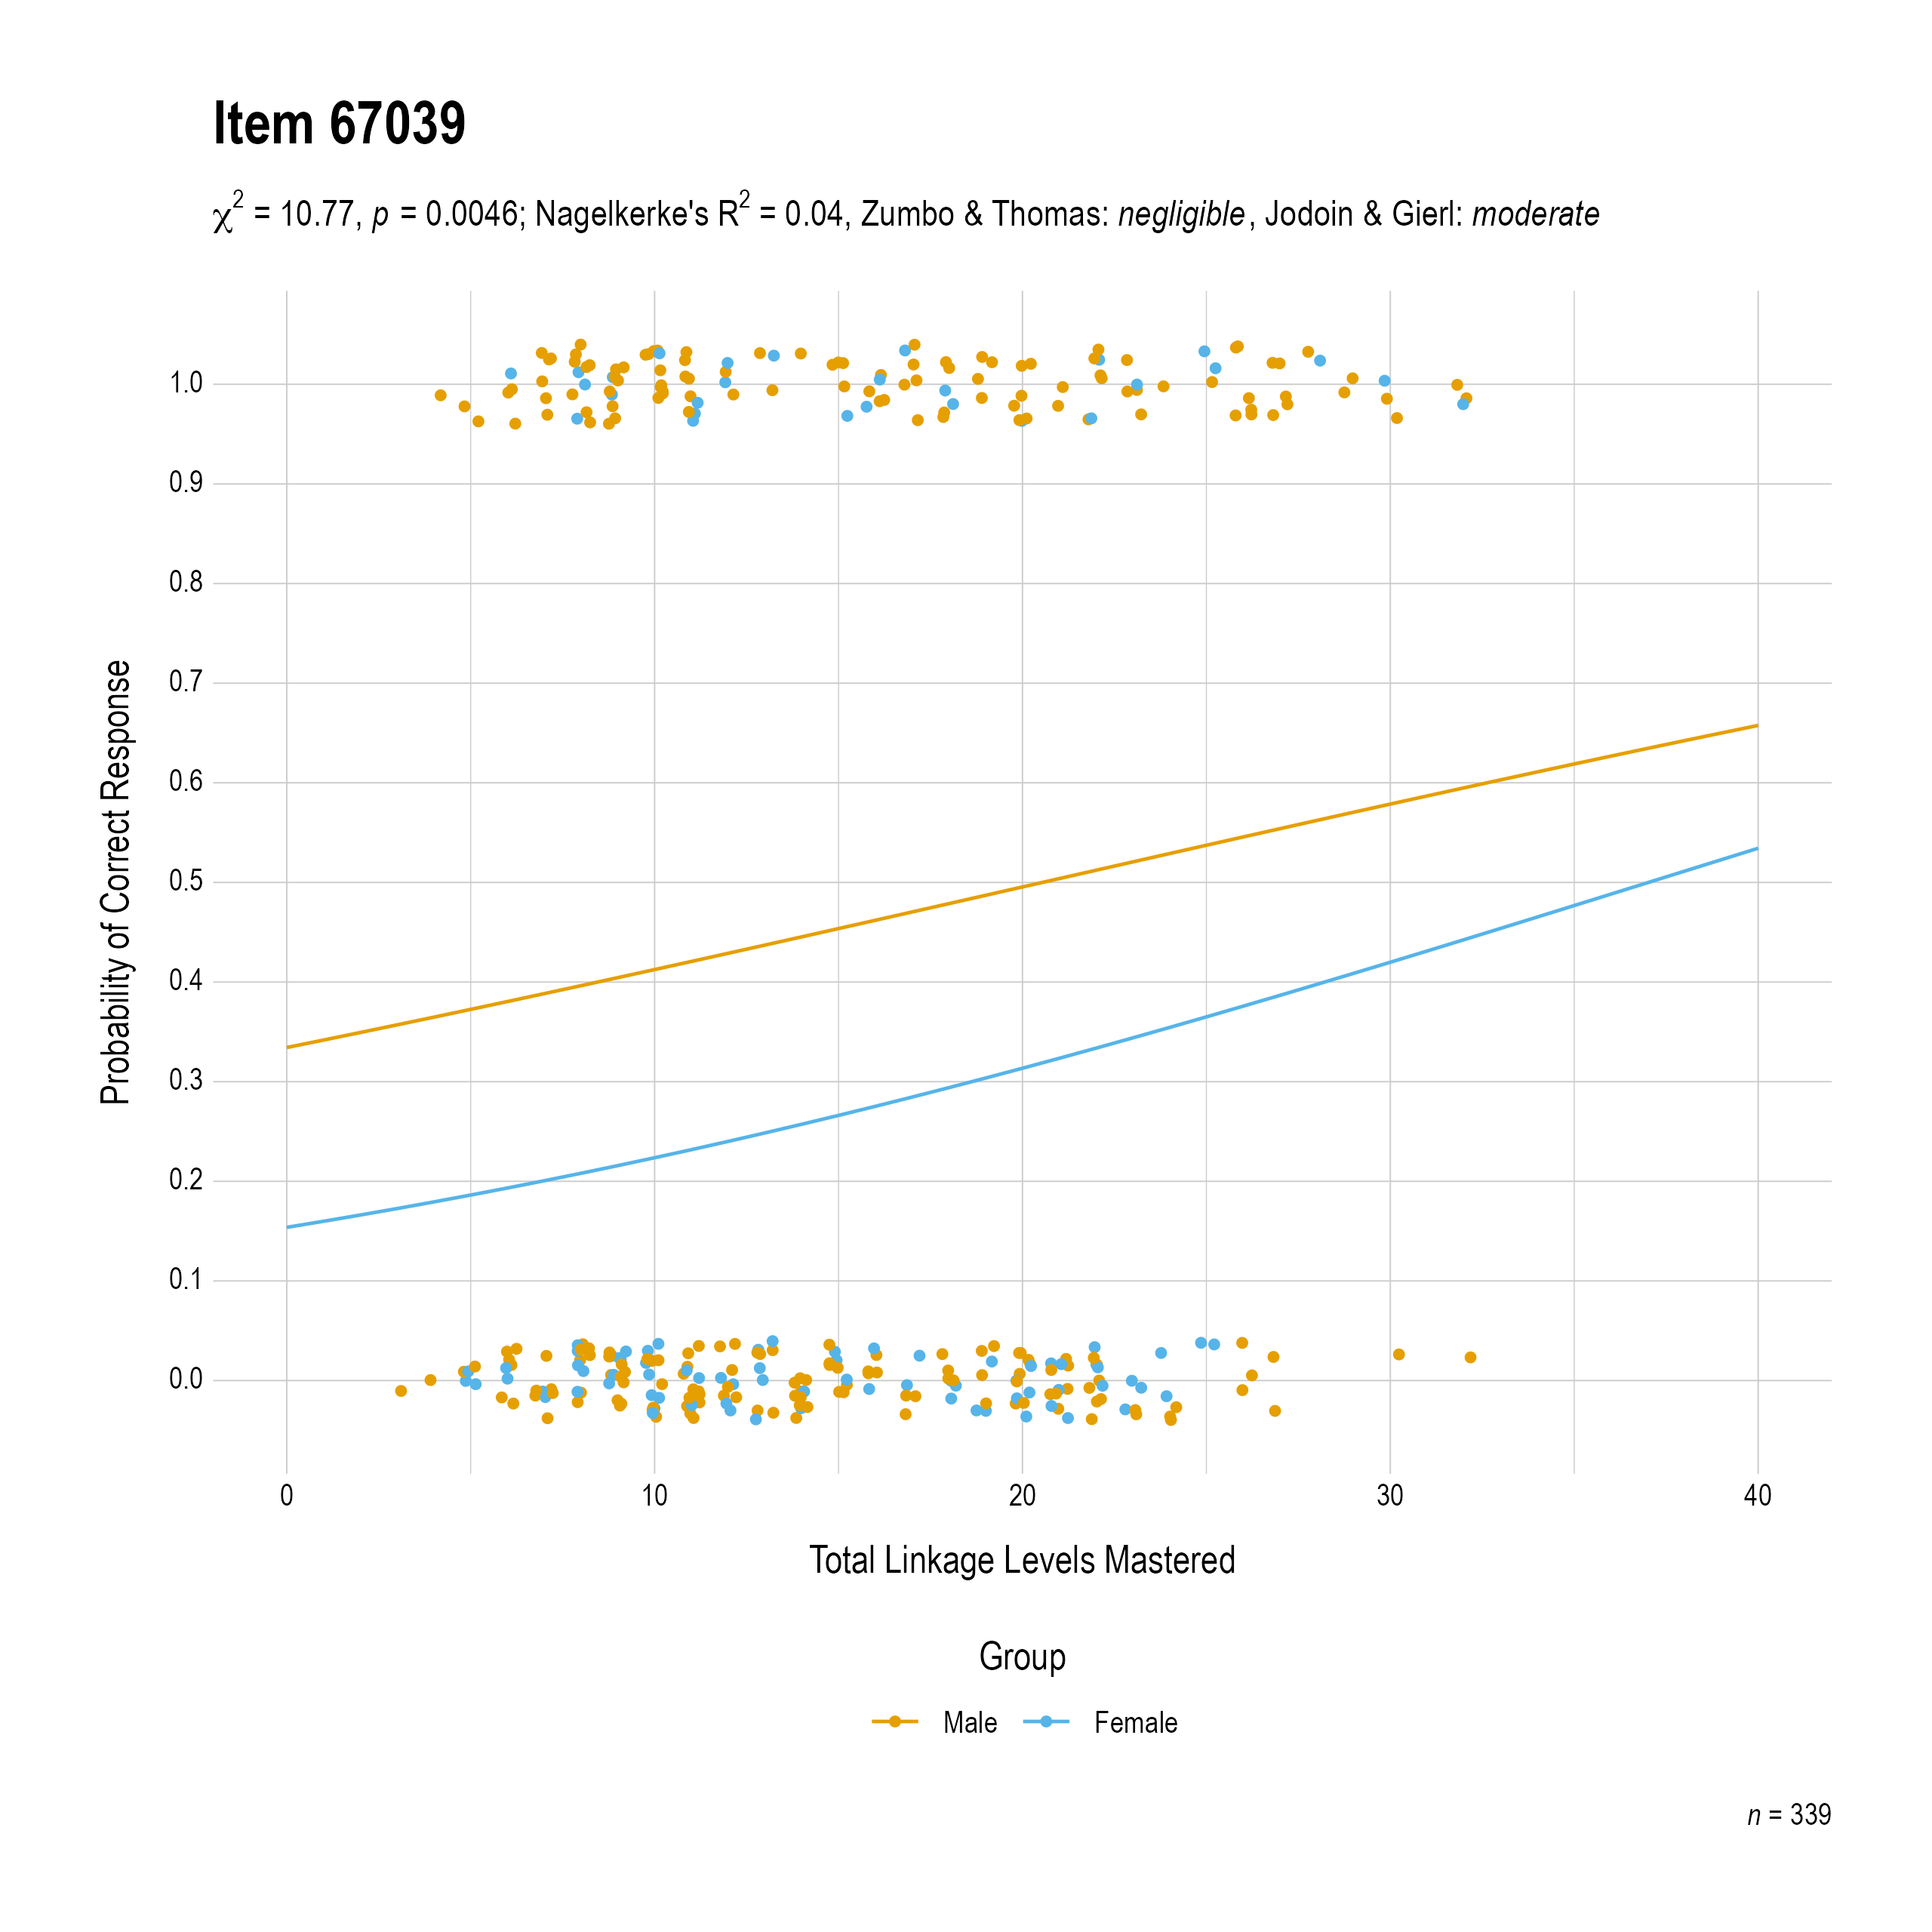 The plot of the combined gender differential item function evidence for Mathematics item 67039. The figure contains points shaded by group. The figure also contains a logistic regression curve for each group. The total linkage levels mastered in is on the x-axis, and the probability of a correct response is on the y-axis.